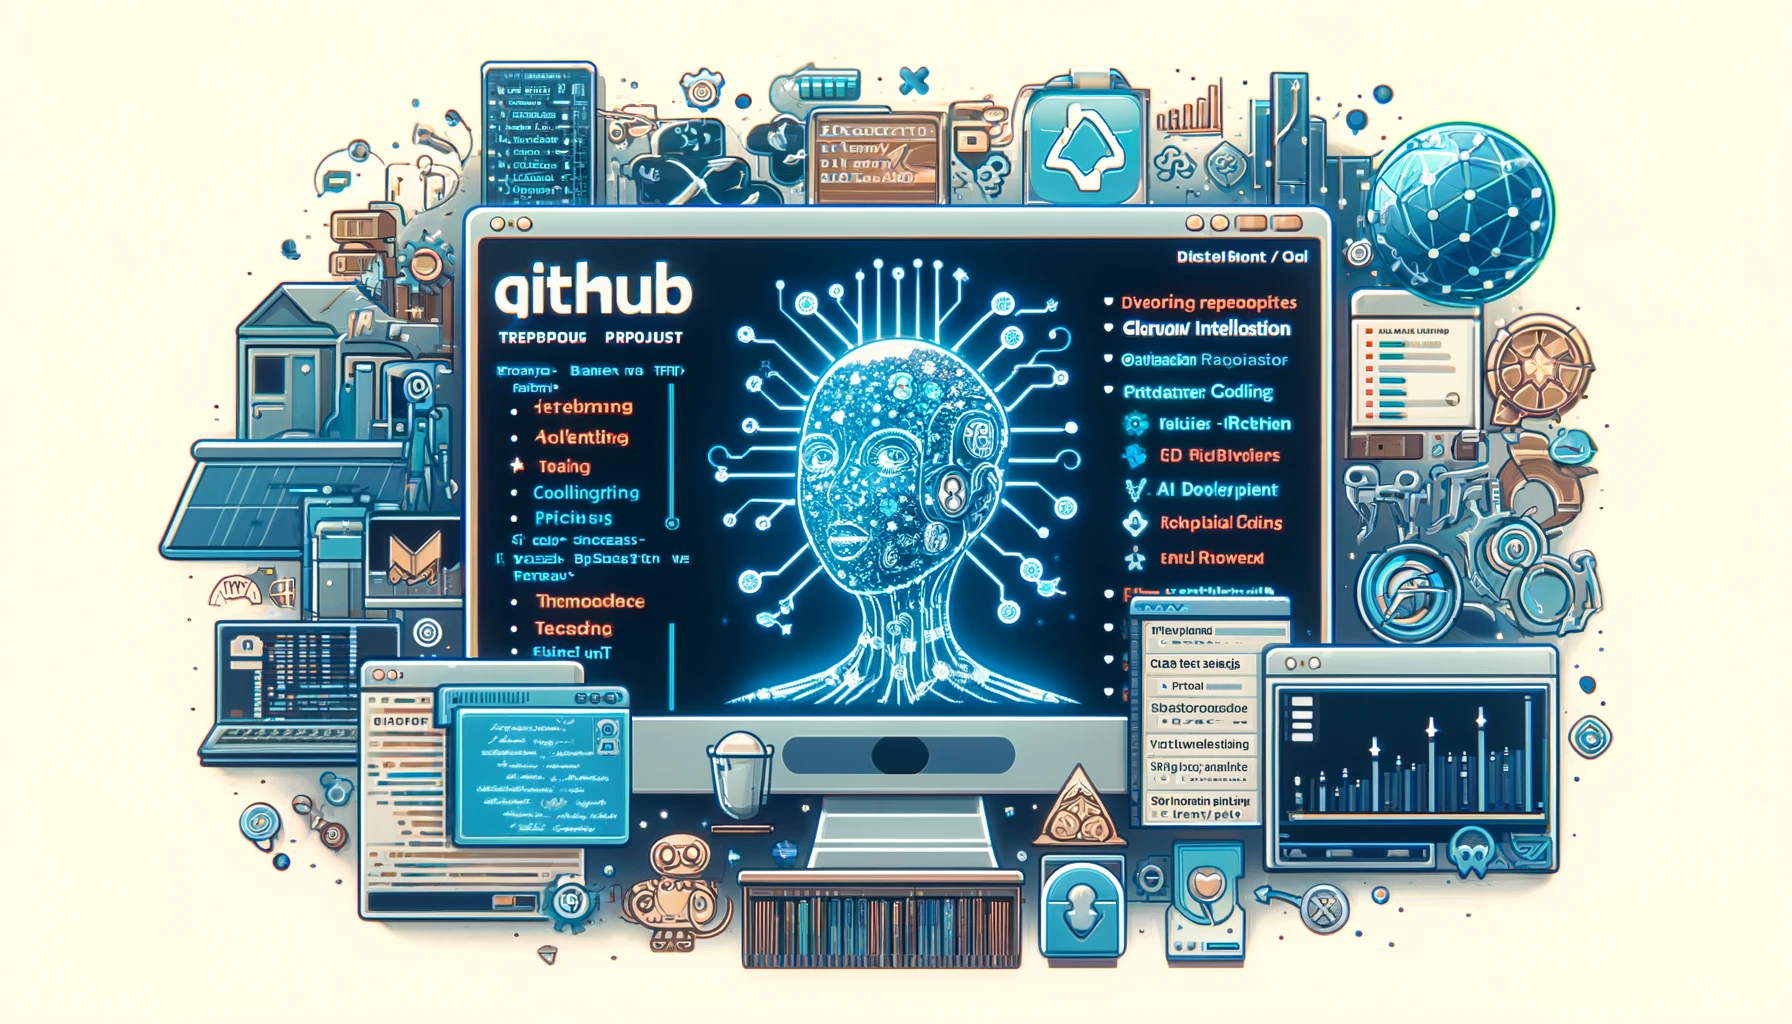 Explore the ultimate guide to the most popular AI projects on GitHub. Discover trending open-source AI repositories and learn how to get involved in innovative artificial intelligence projects.